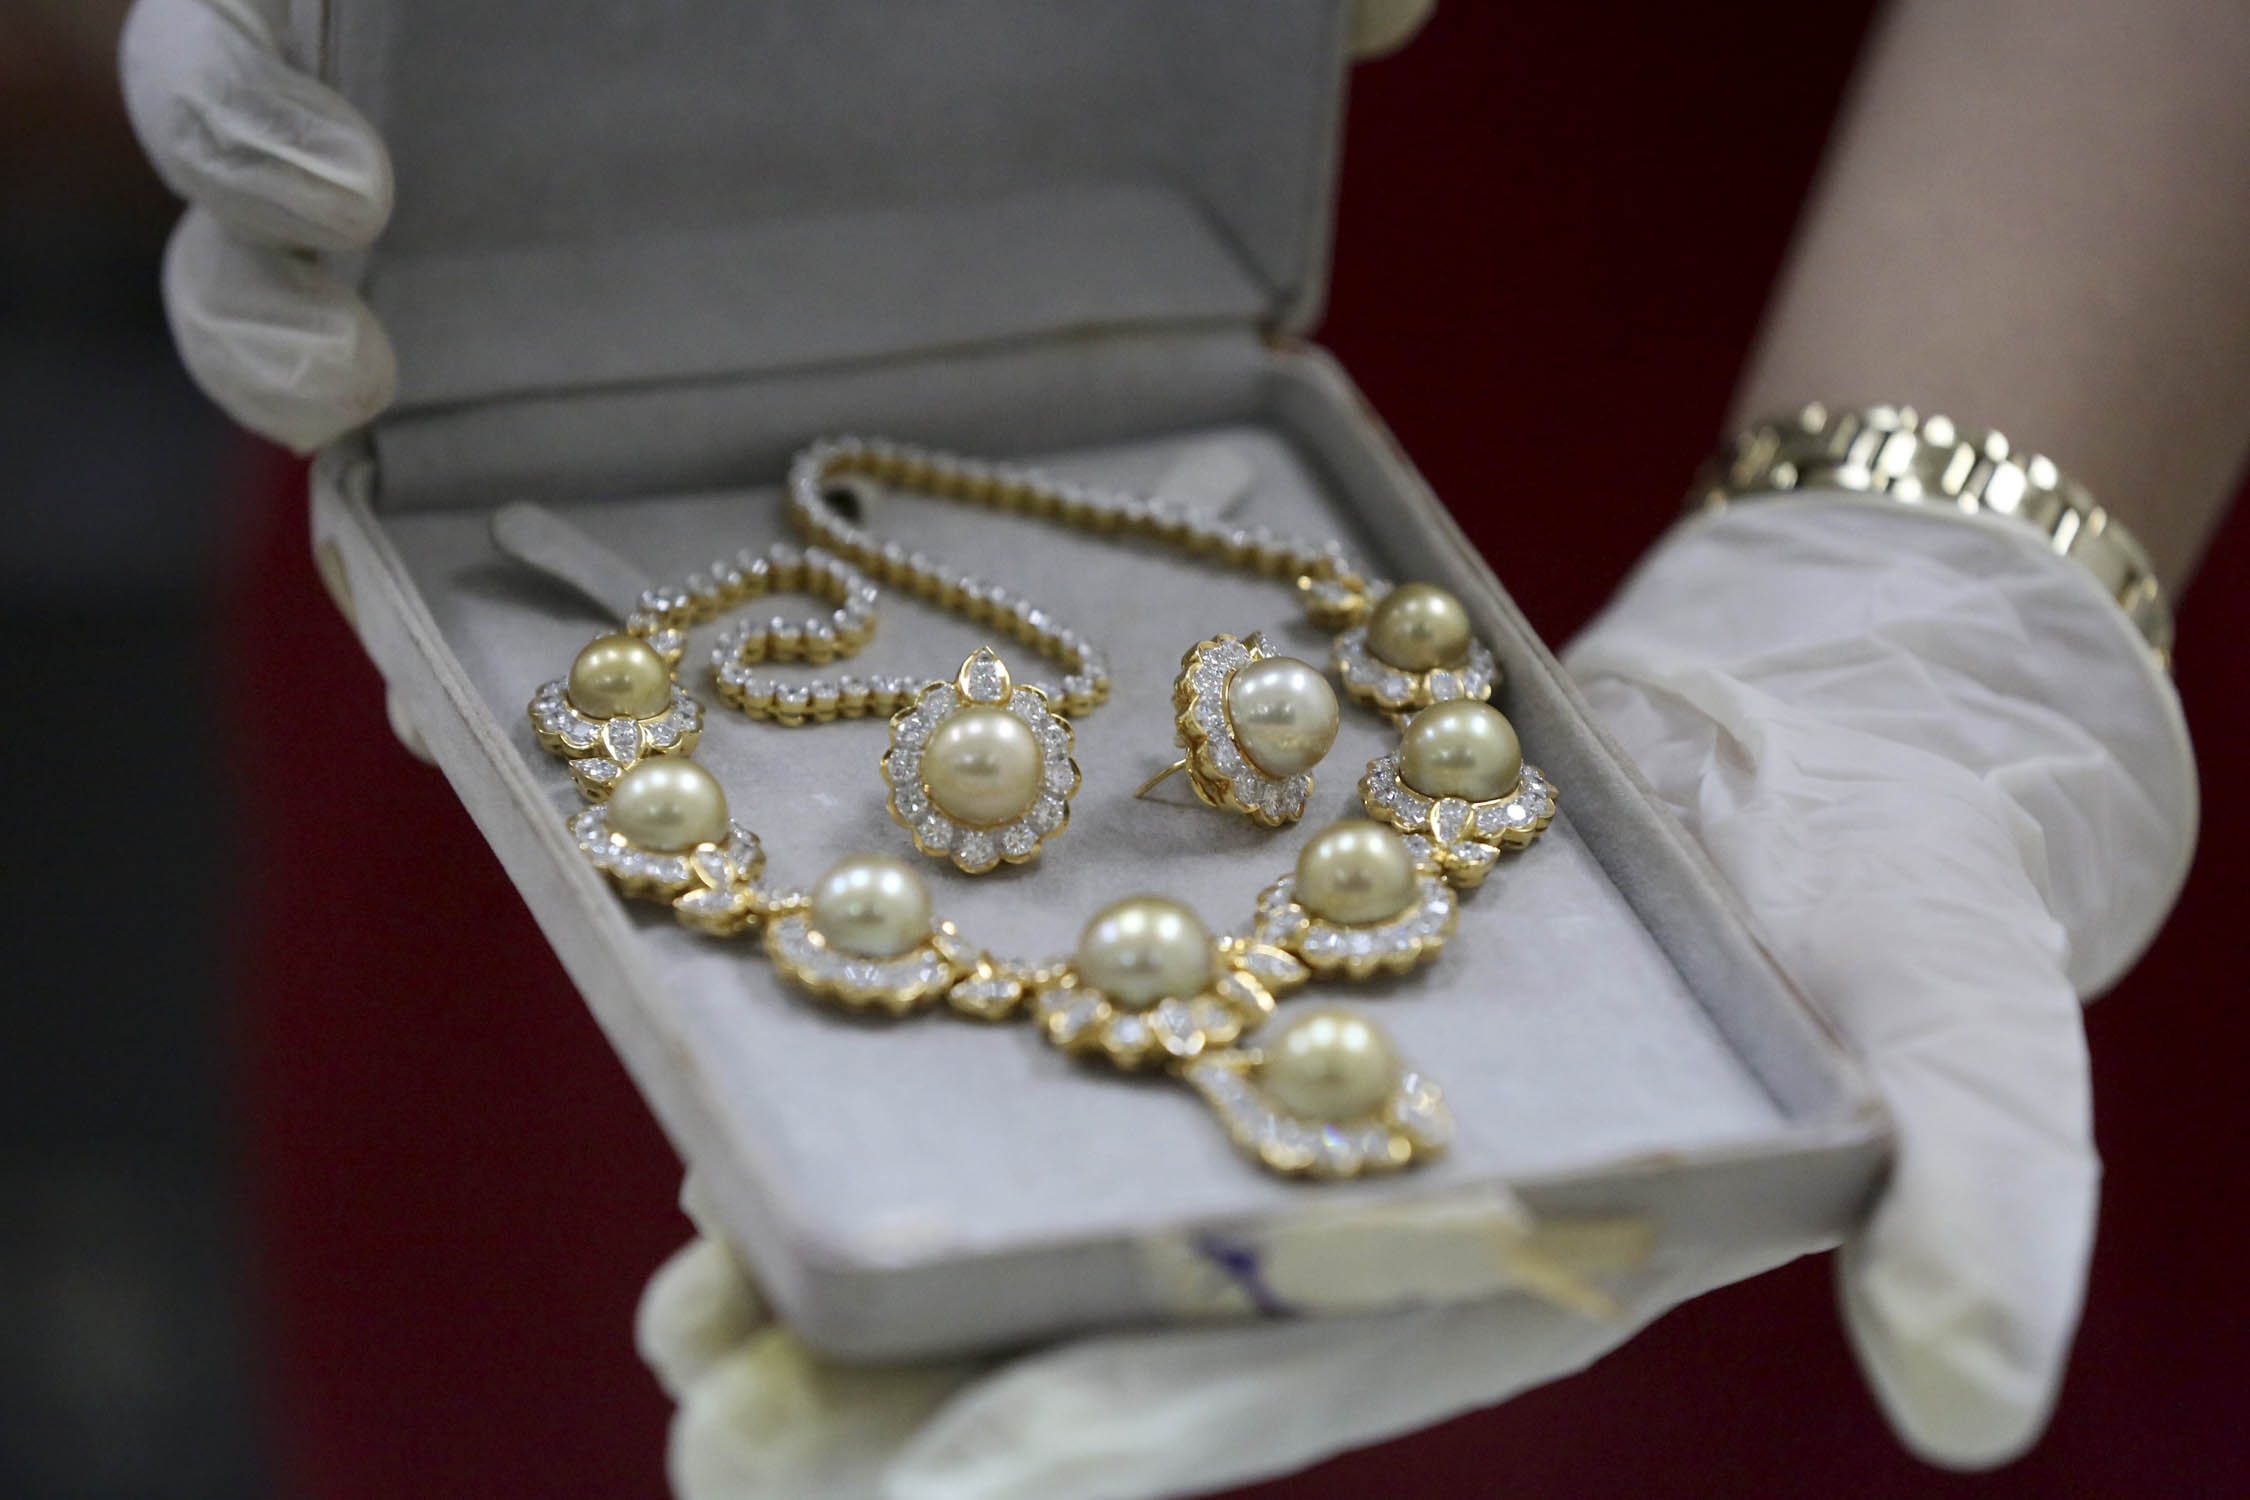 New board to manage fund from auction of Marcos gems urged